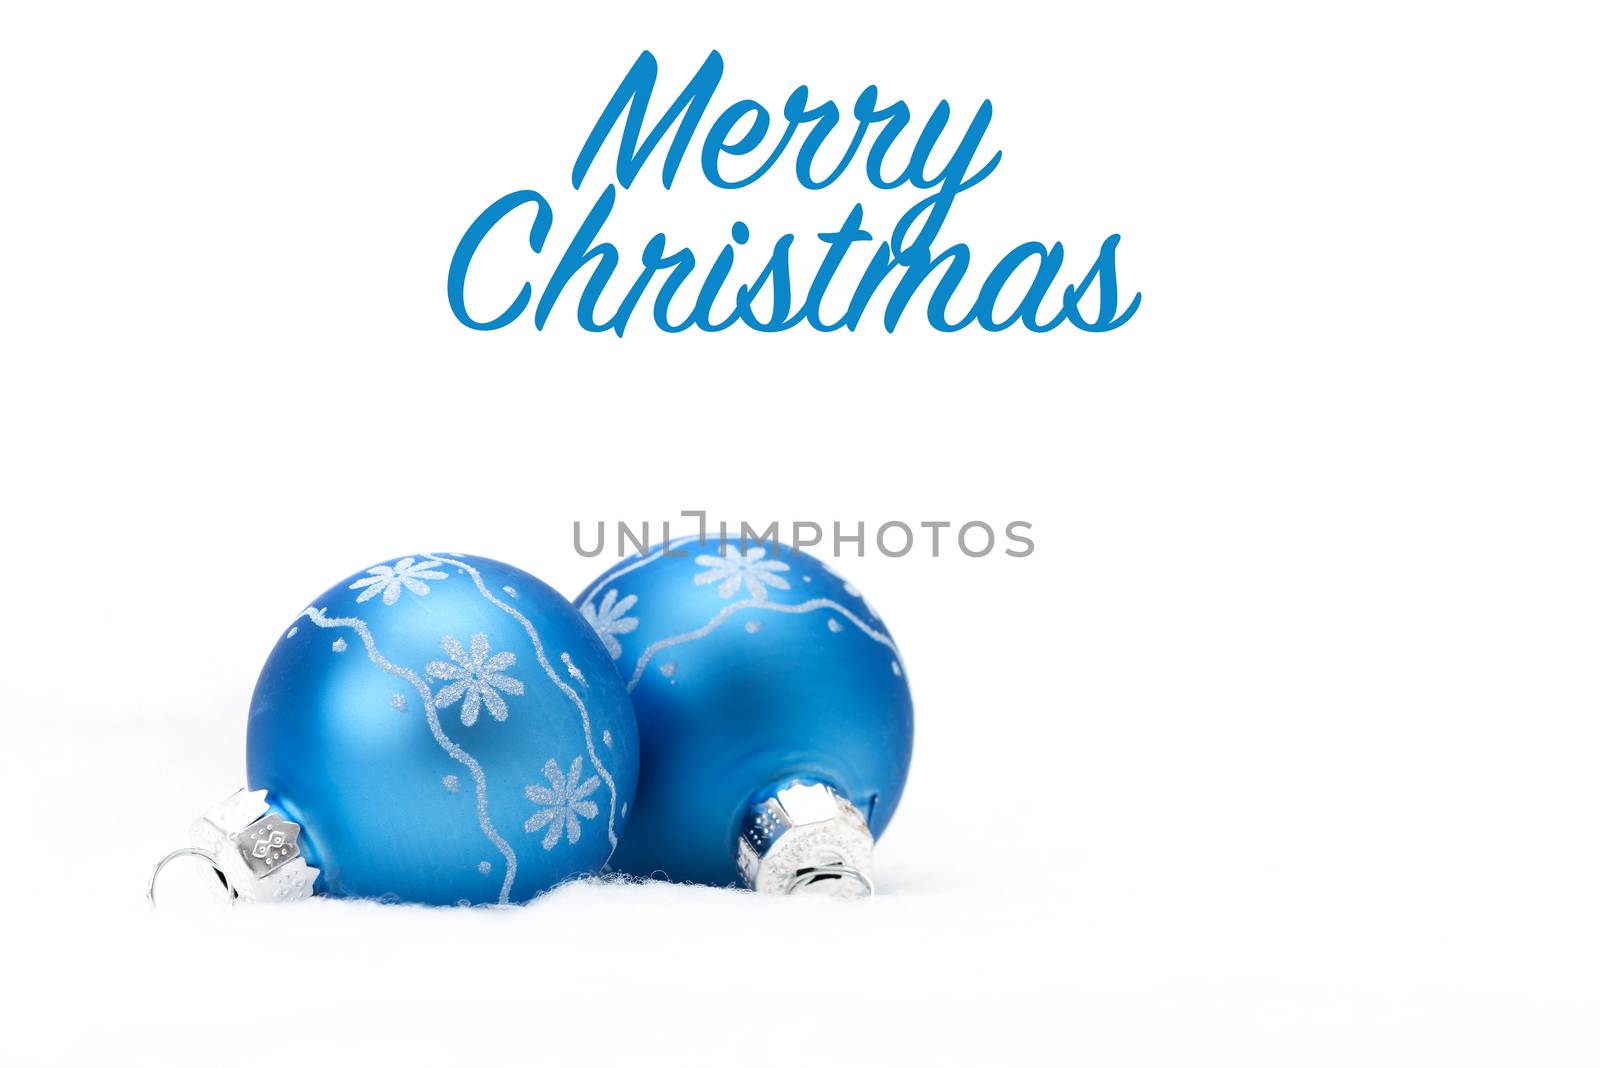 Two blue glass christmas balls with a snowflake motif.